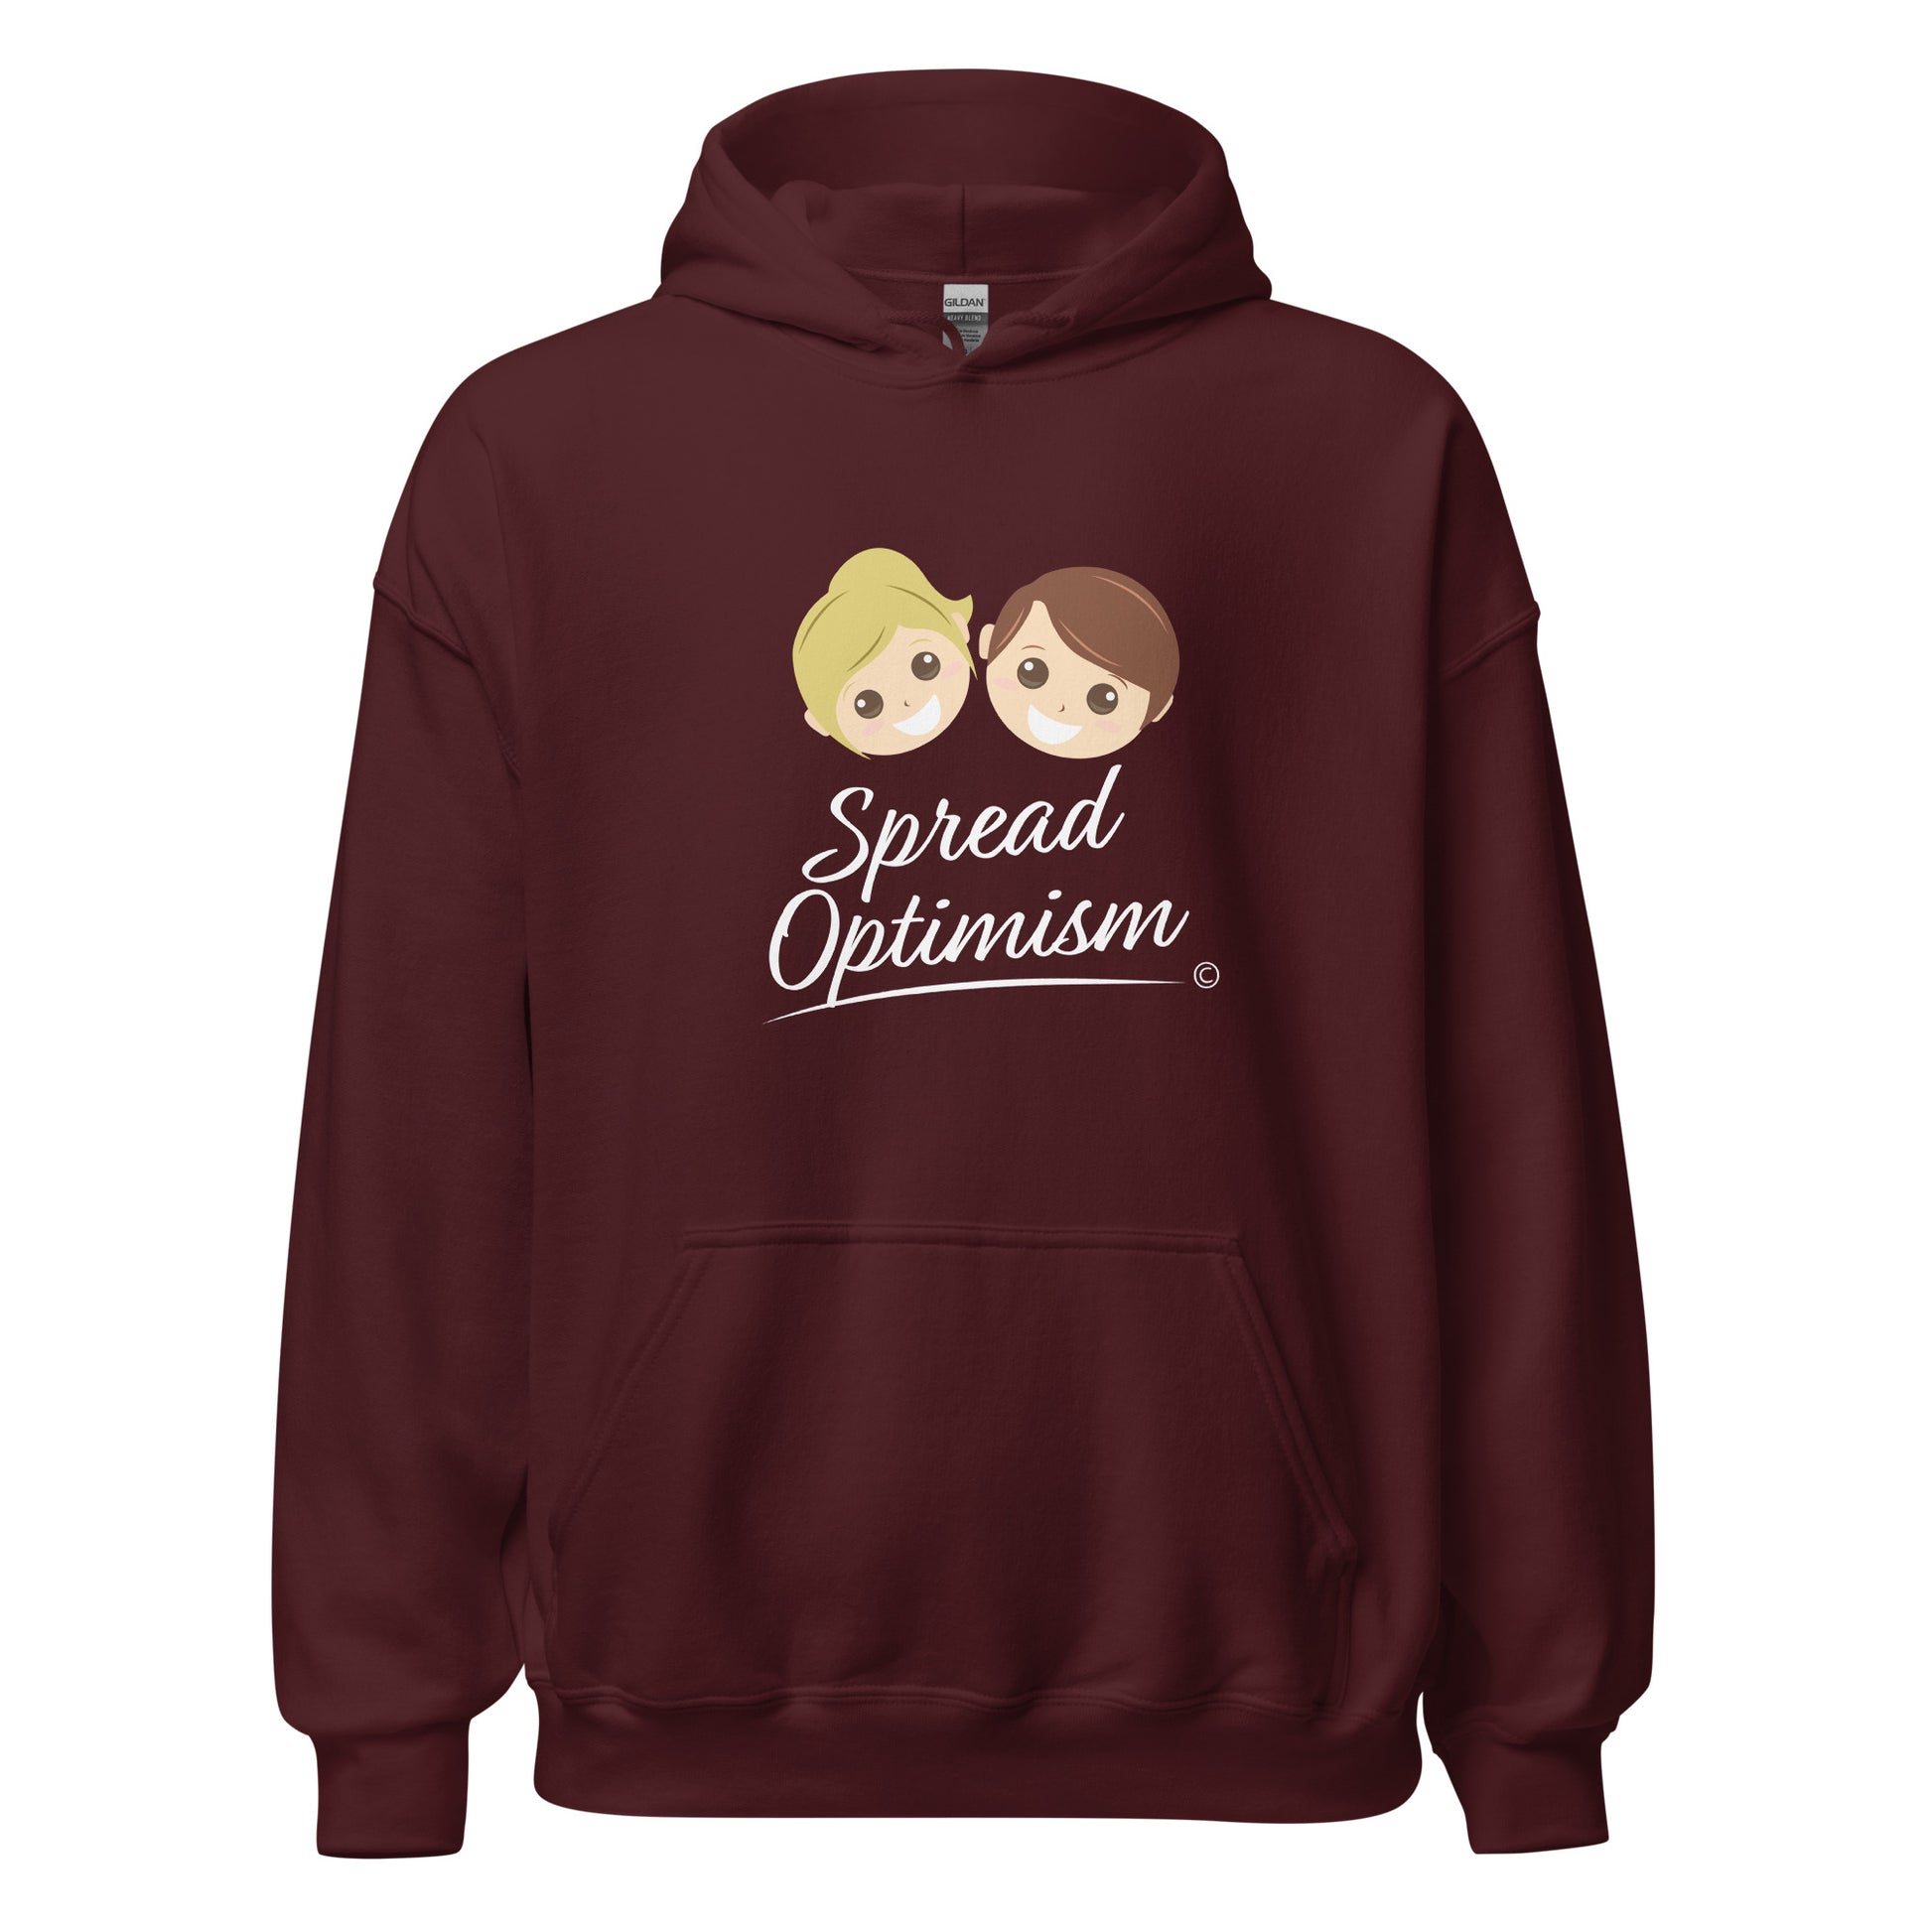 Outdoor unisex hoodies for him and her- maroon